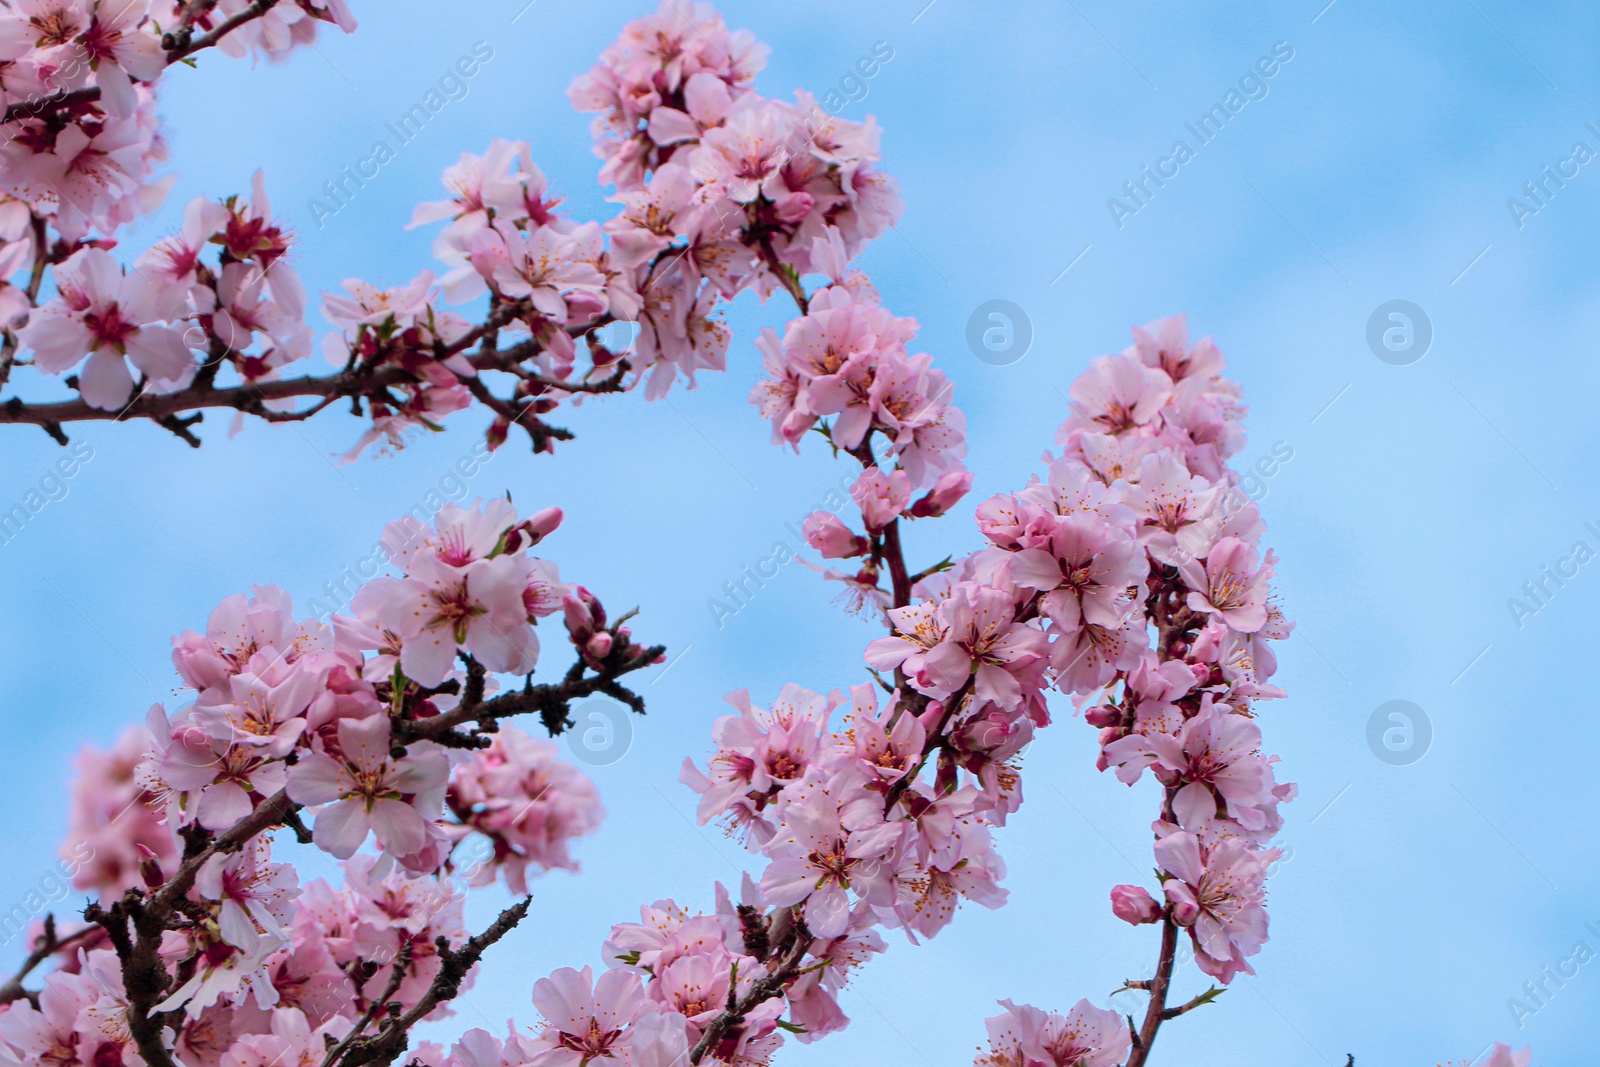 Photo of Delicate spring pink cherry blossoms on tree against blue sky